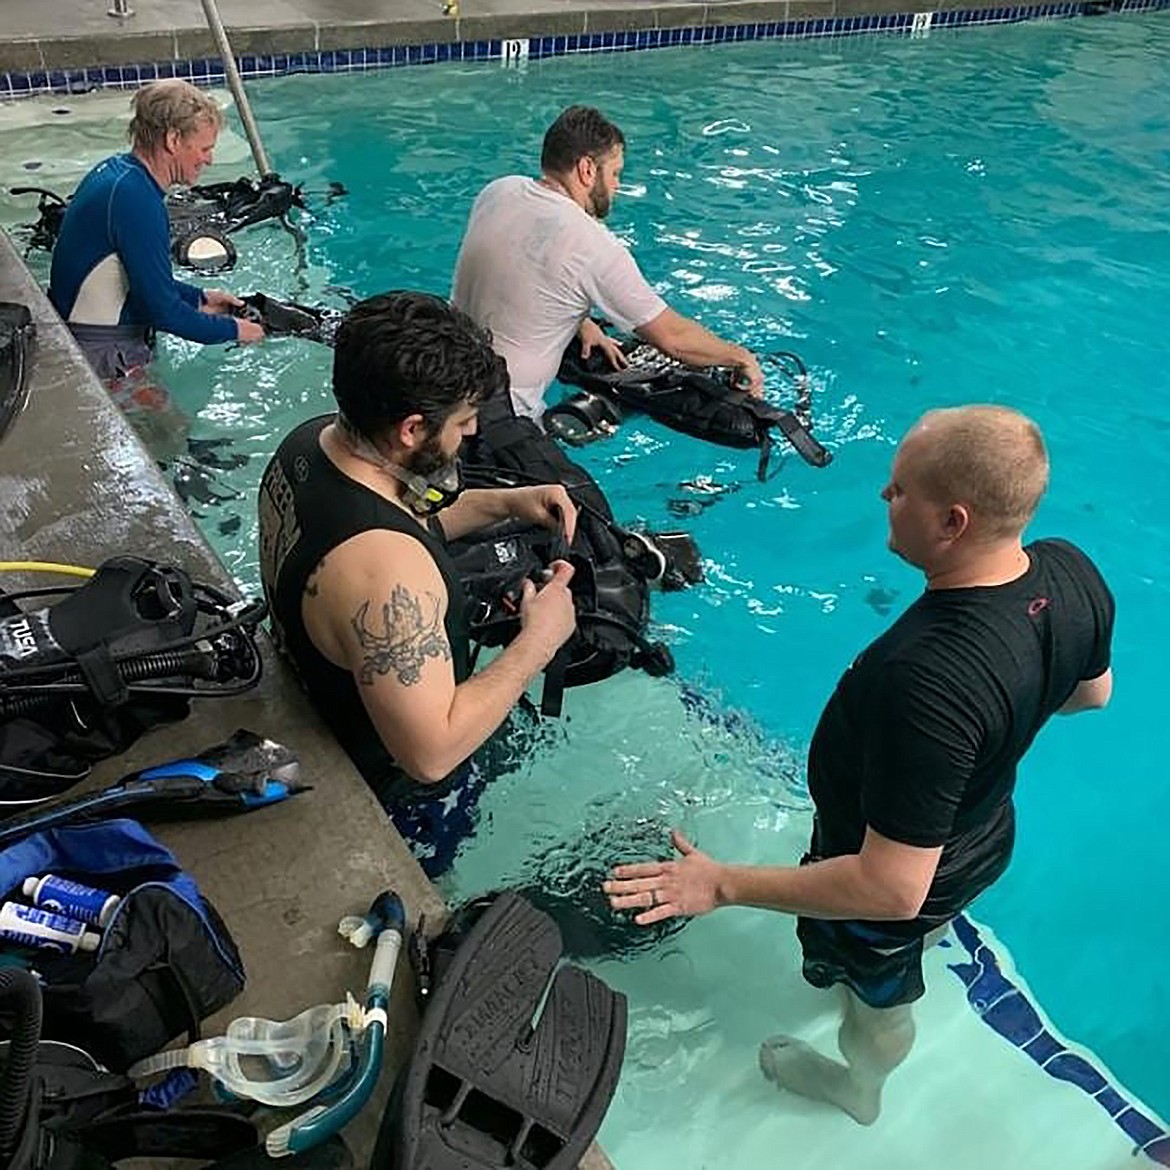 Glen McKinnon, upper left, takes to the training pool at Flathead Scuba along with fellow instructor Chuck Williams, bottom right.